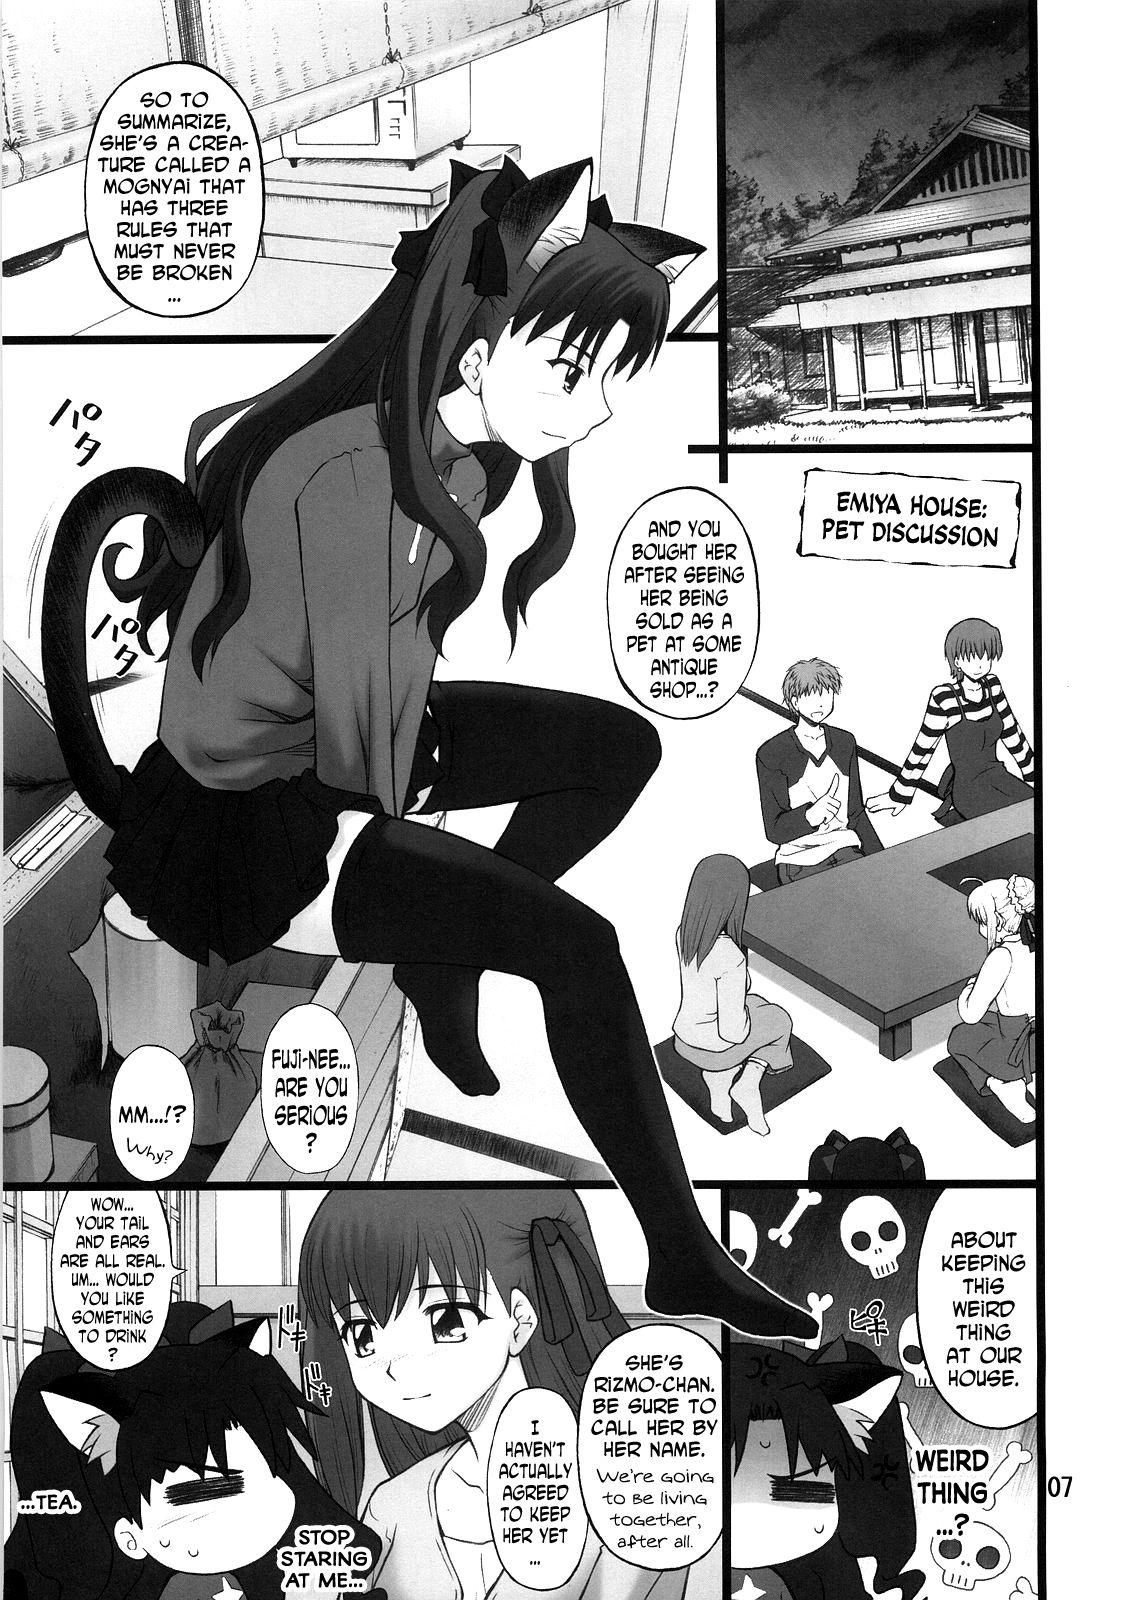 Huge Dick Grem-Rin 1 - Fate stay night Workout - Page 6